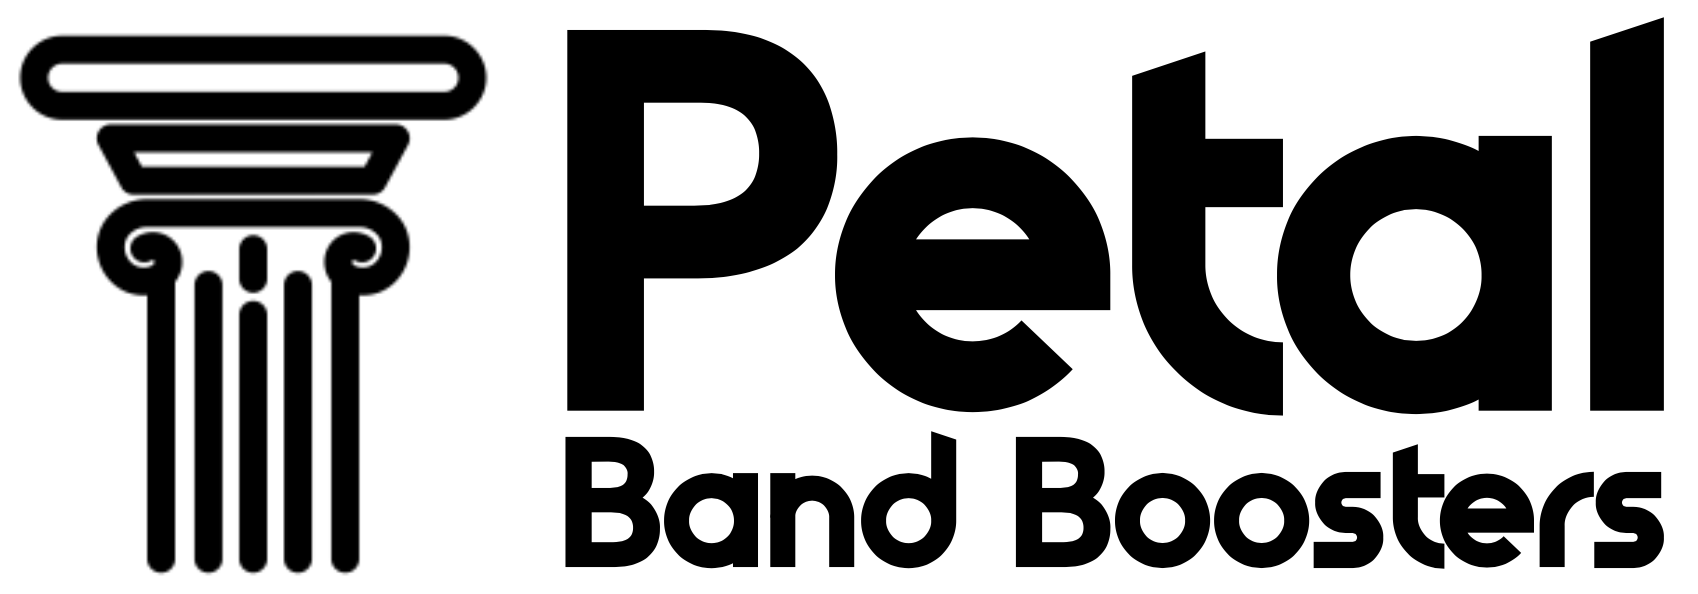 Petal Band Boosters